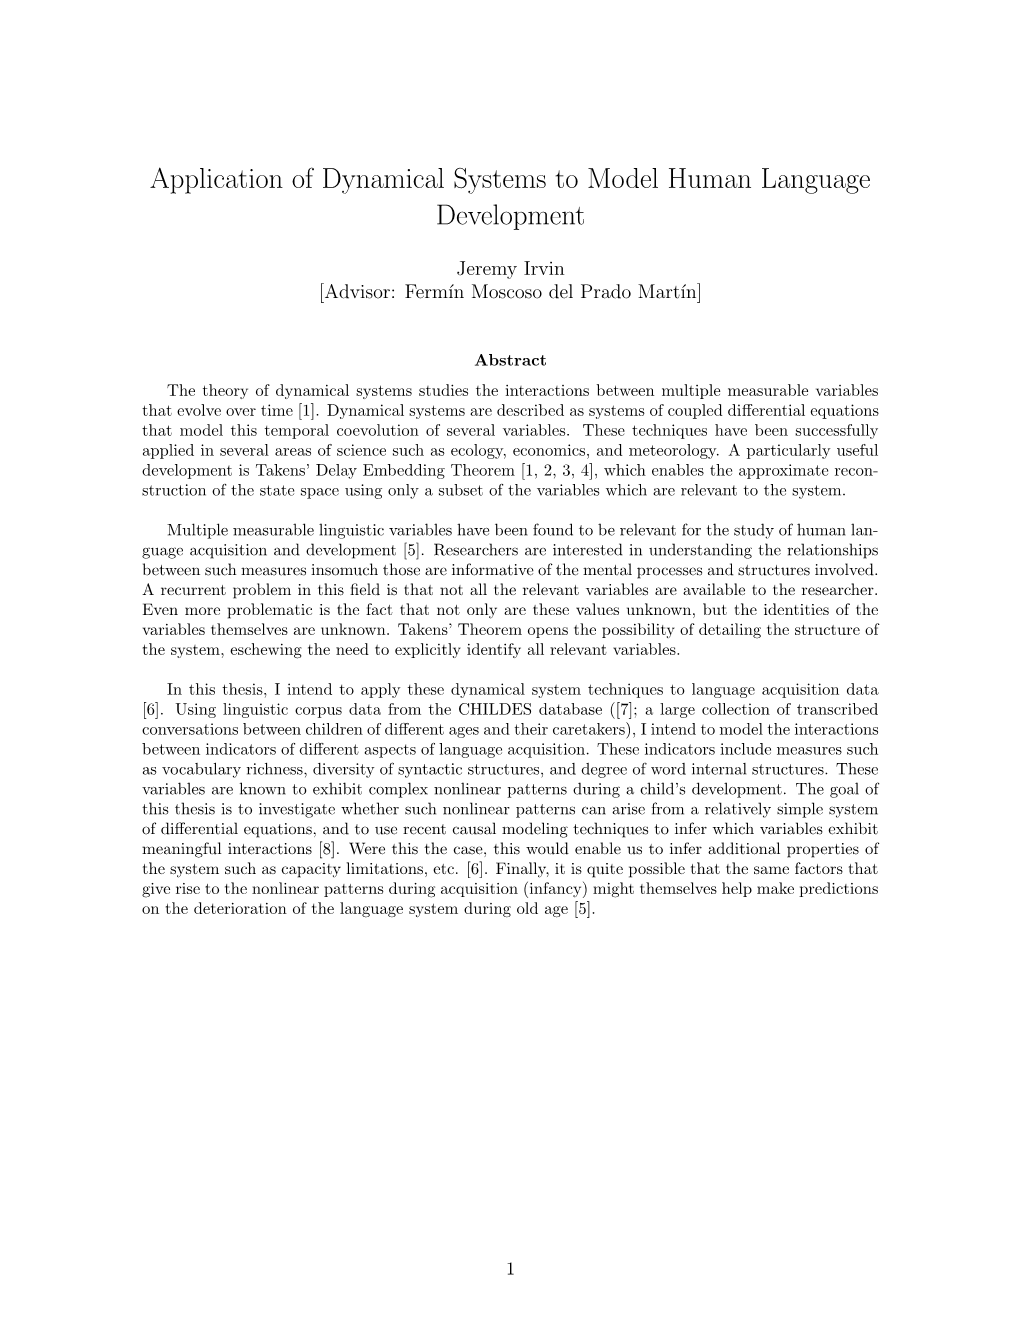 Application of Dynamical Systems to Model Human Language Development